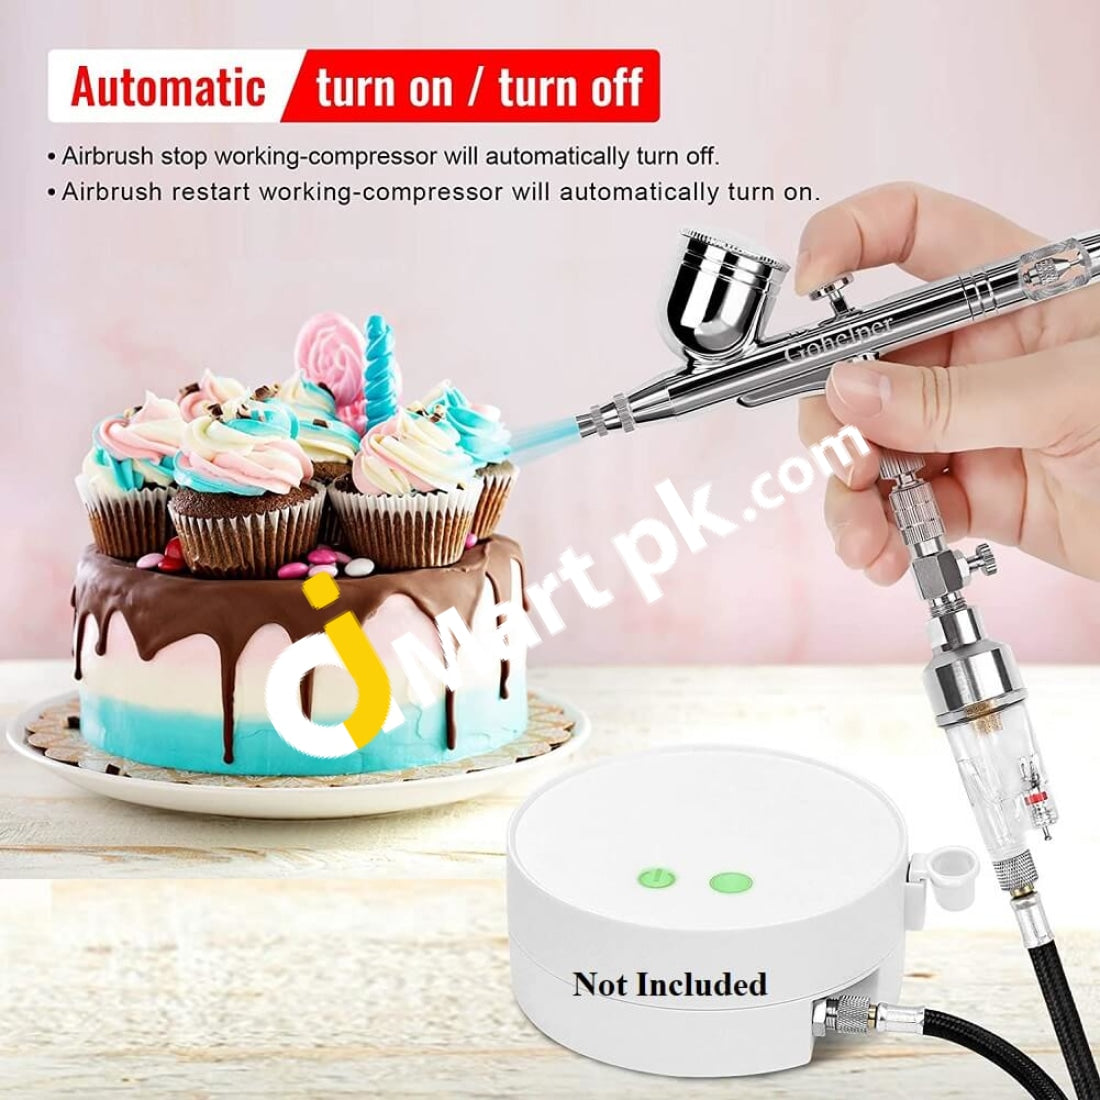 Gohelper Dual-Action Air Brush Gun for Cake Decorating, Makeup, Plastic  Models, Nails, Clothes, Cookies, Baking, Food, Arts & Crafts - Imported  from